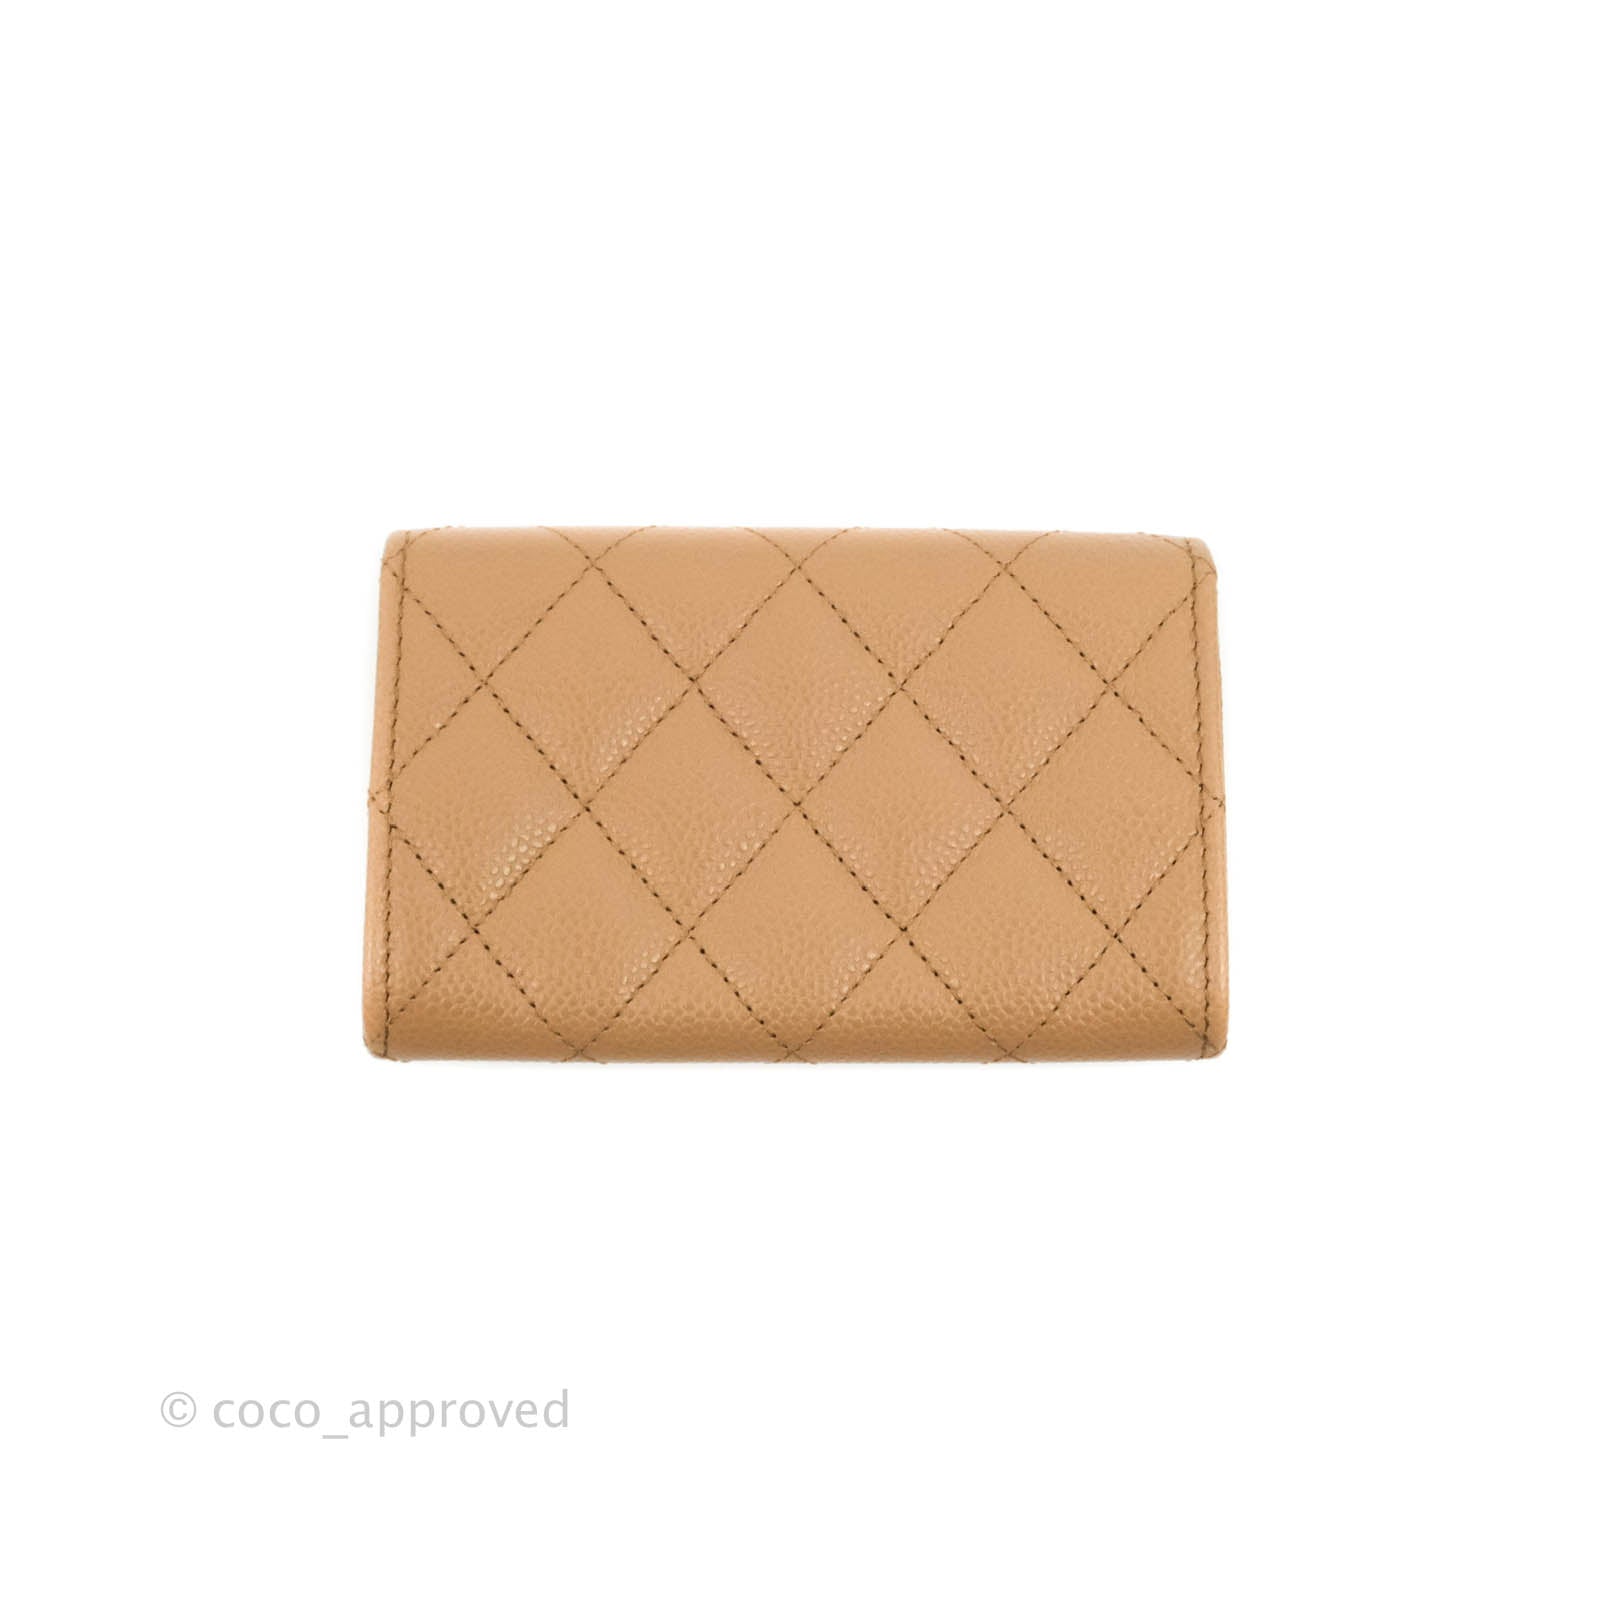 Chanel Quilted Flap Card Holder Purple Lambskin Gold Hardware – Coco  Approved Studio